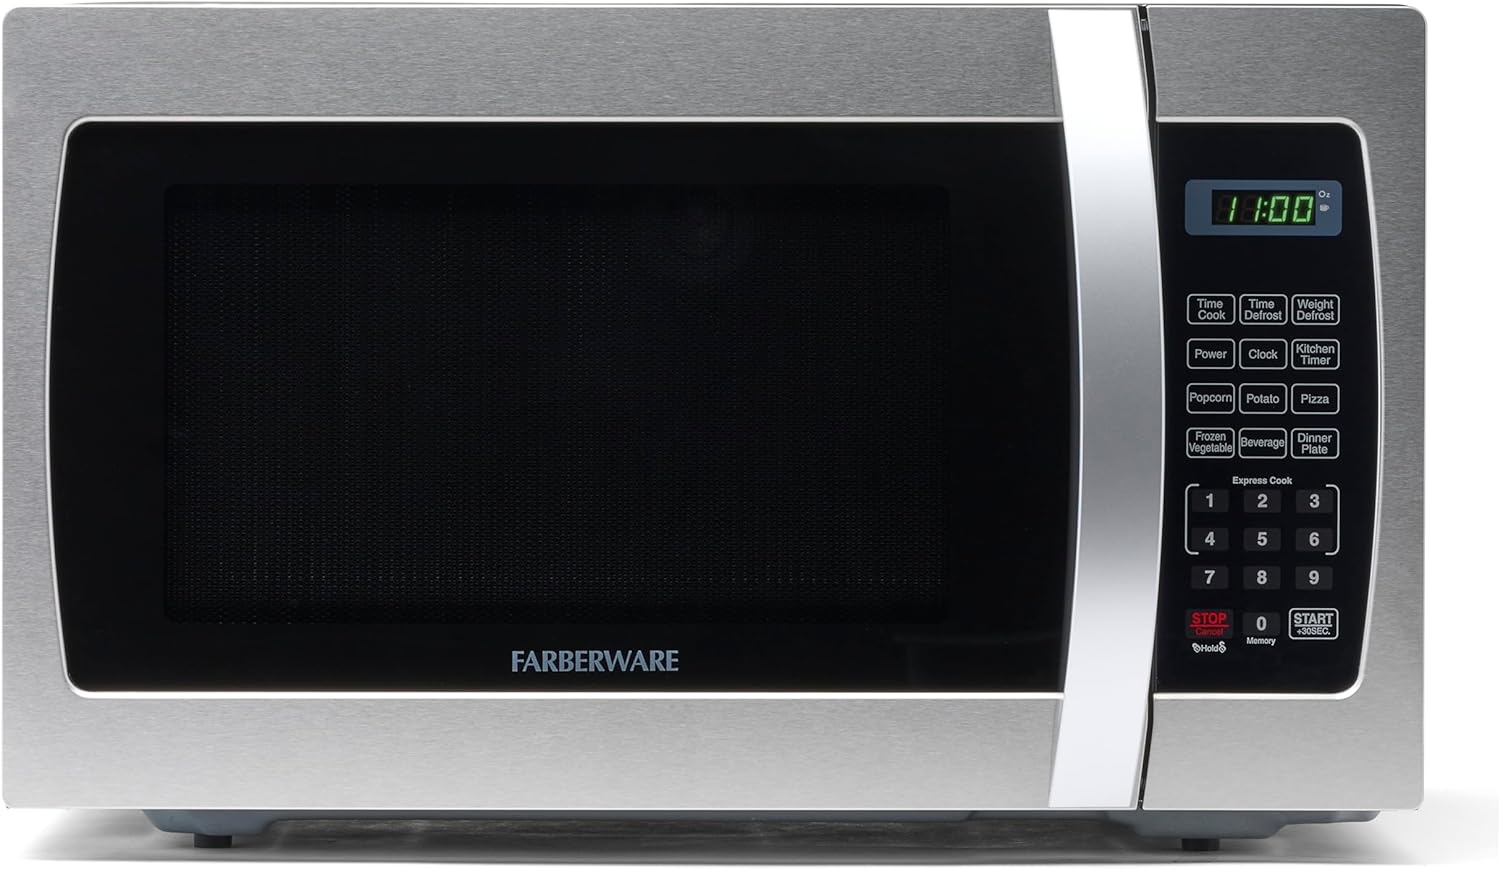 A front view of a microwave oven